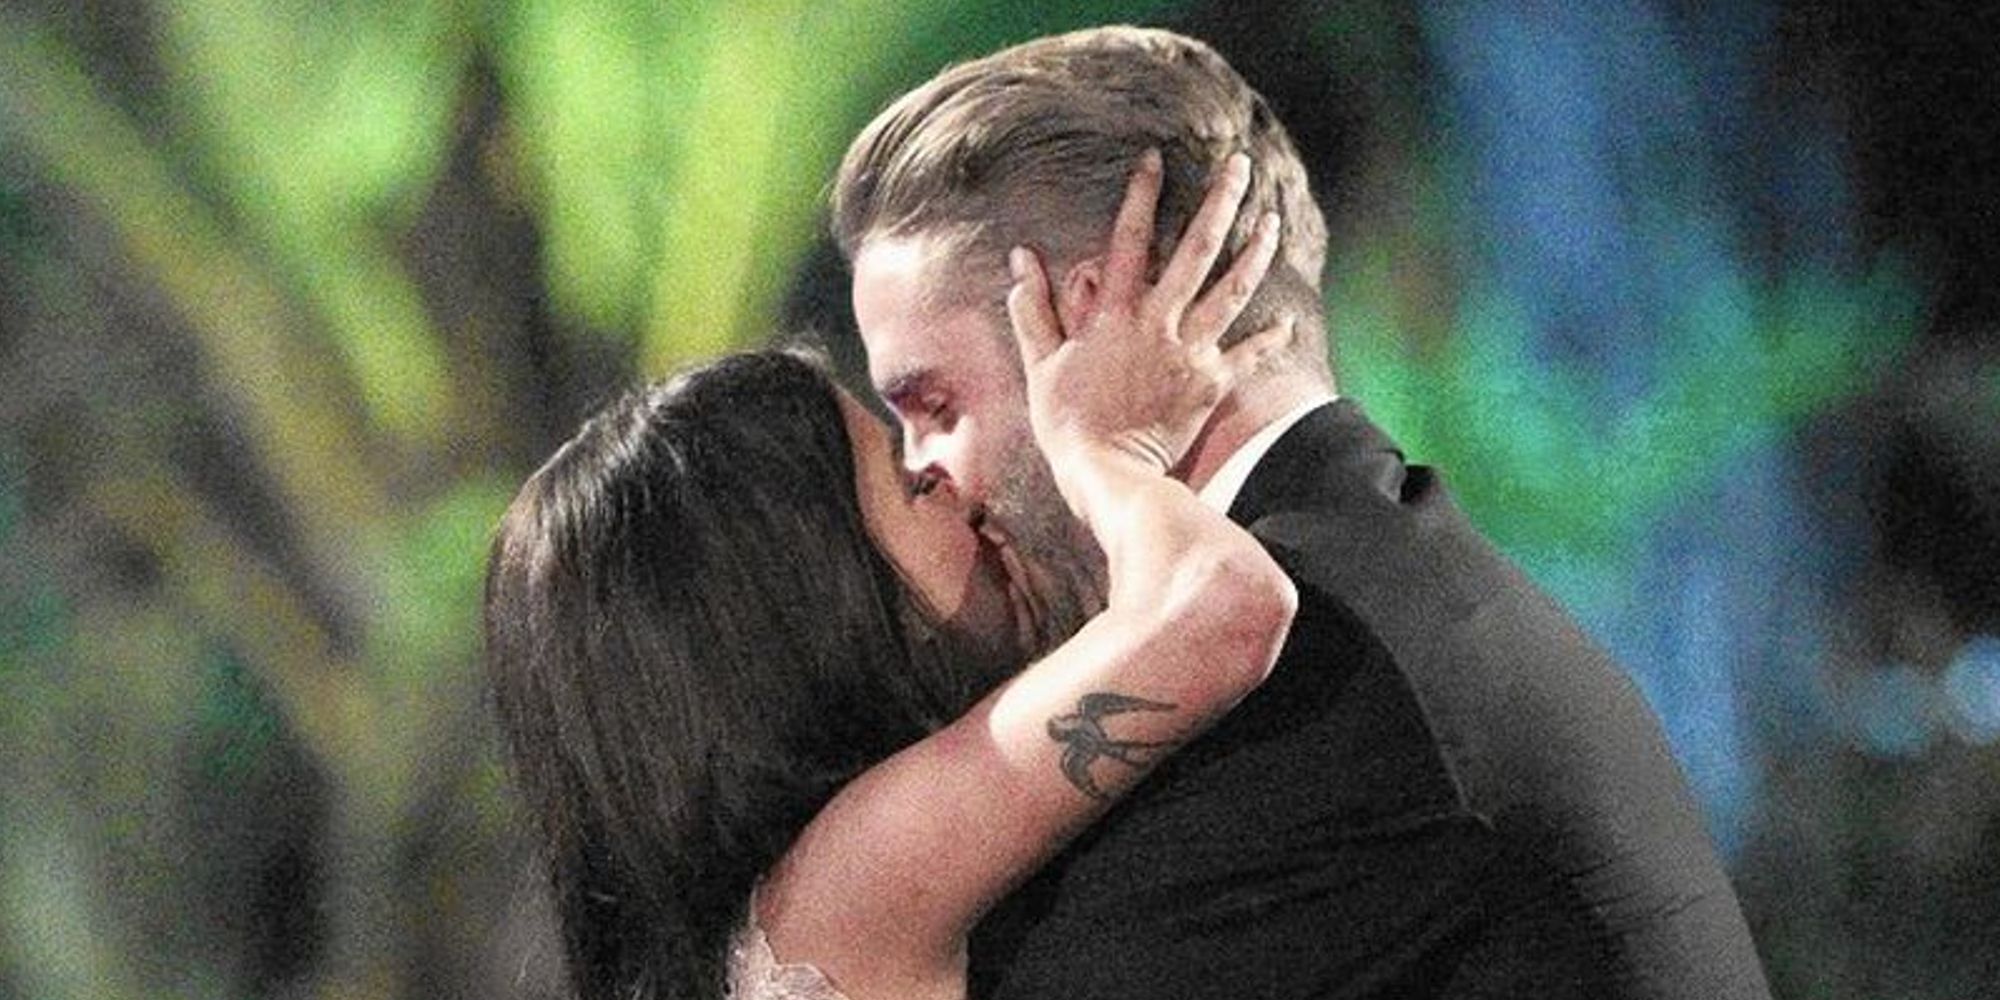 Kaitlyn Bristowe and Shawn Booth on The Bachelorette season 11